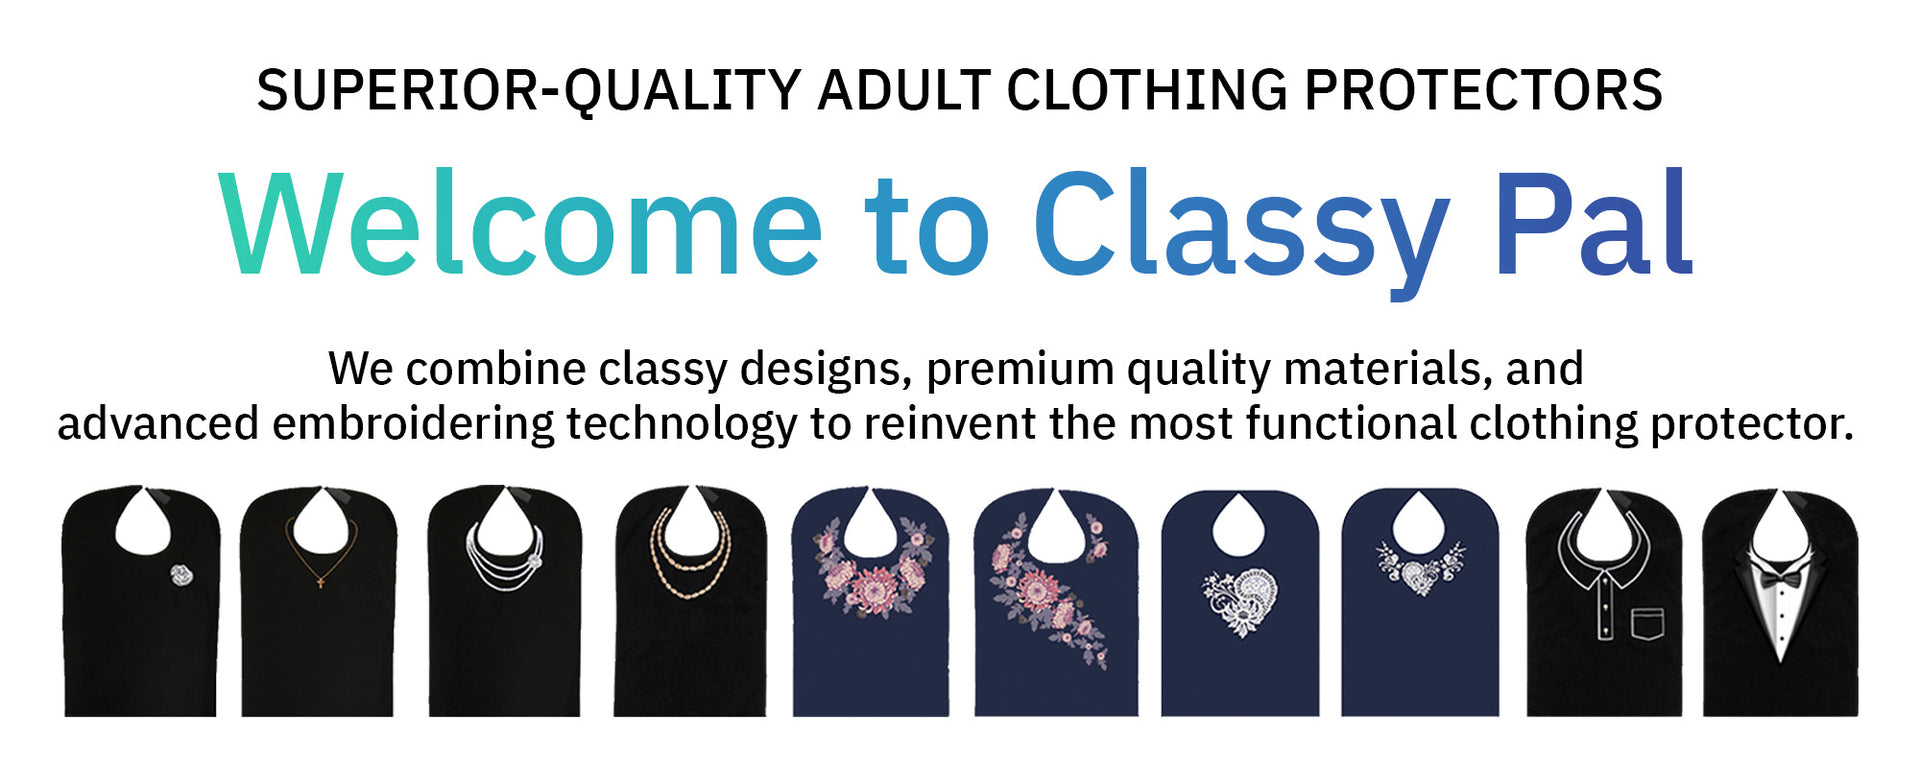 Welcome to Classy Pal. We combine classy designs, premium quality materials, and advanced embroidering technology to reinvent the most functional clothing protector.